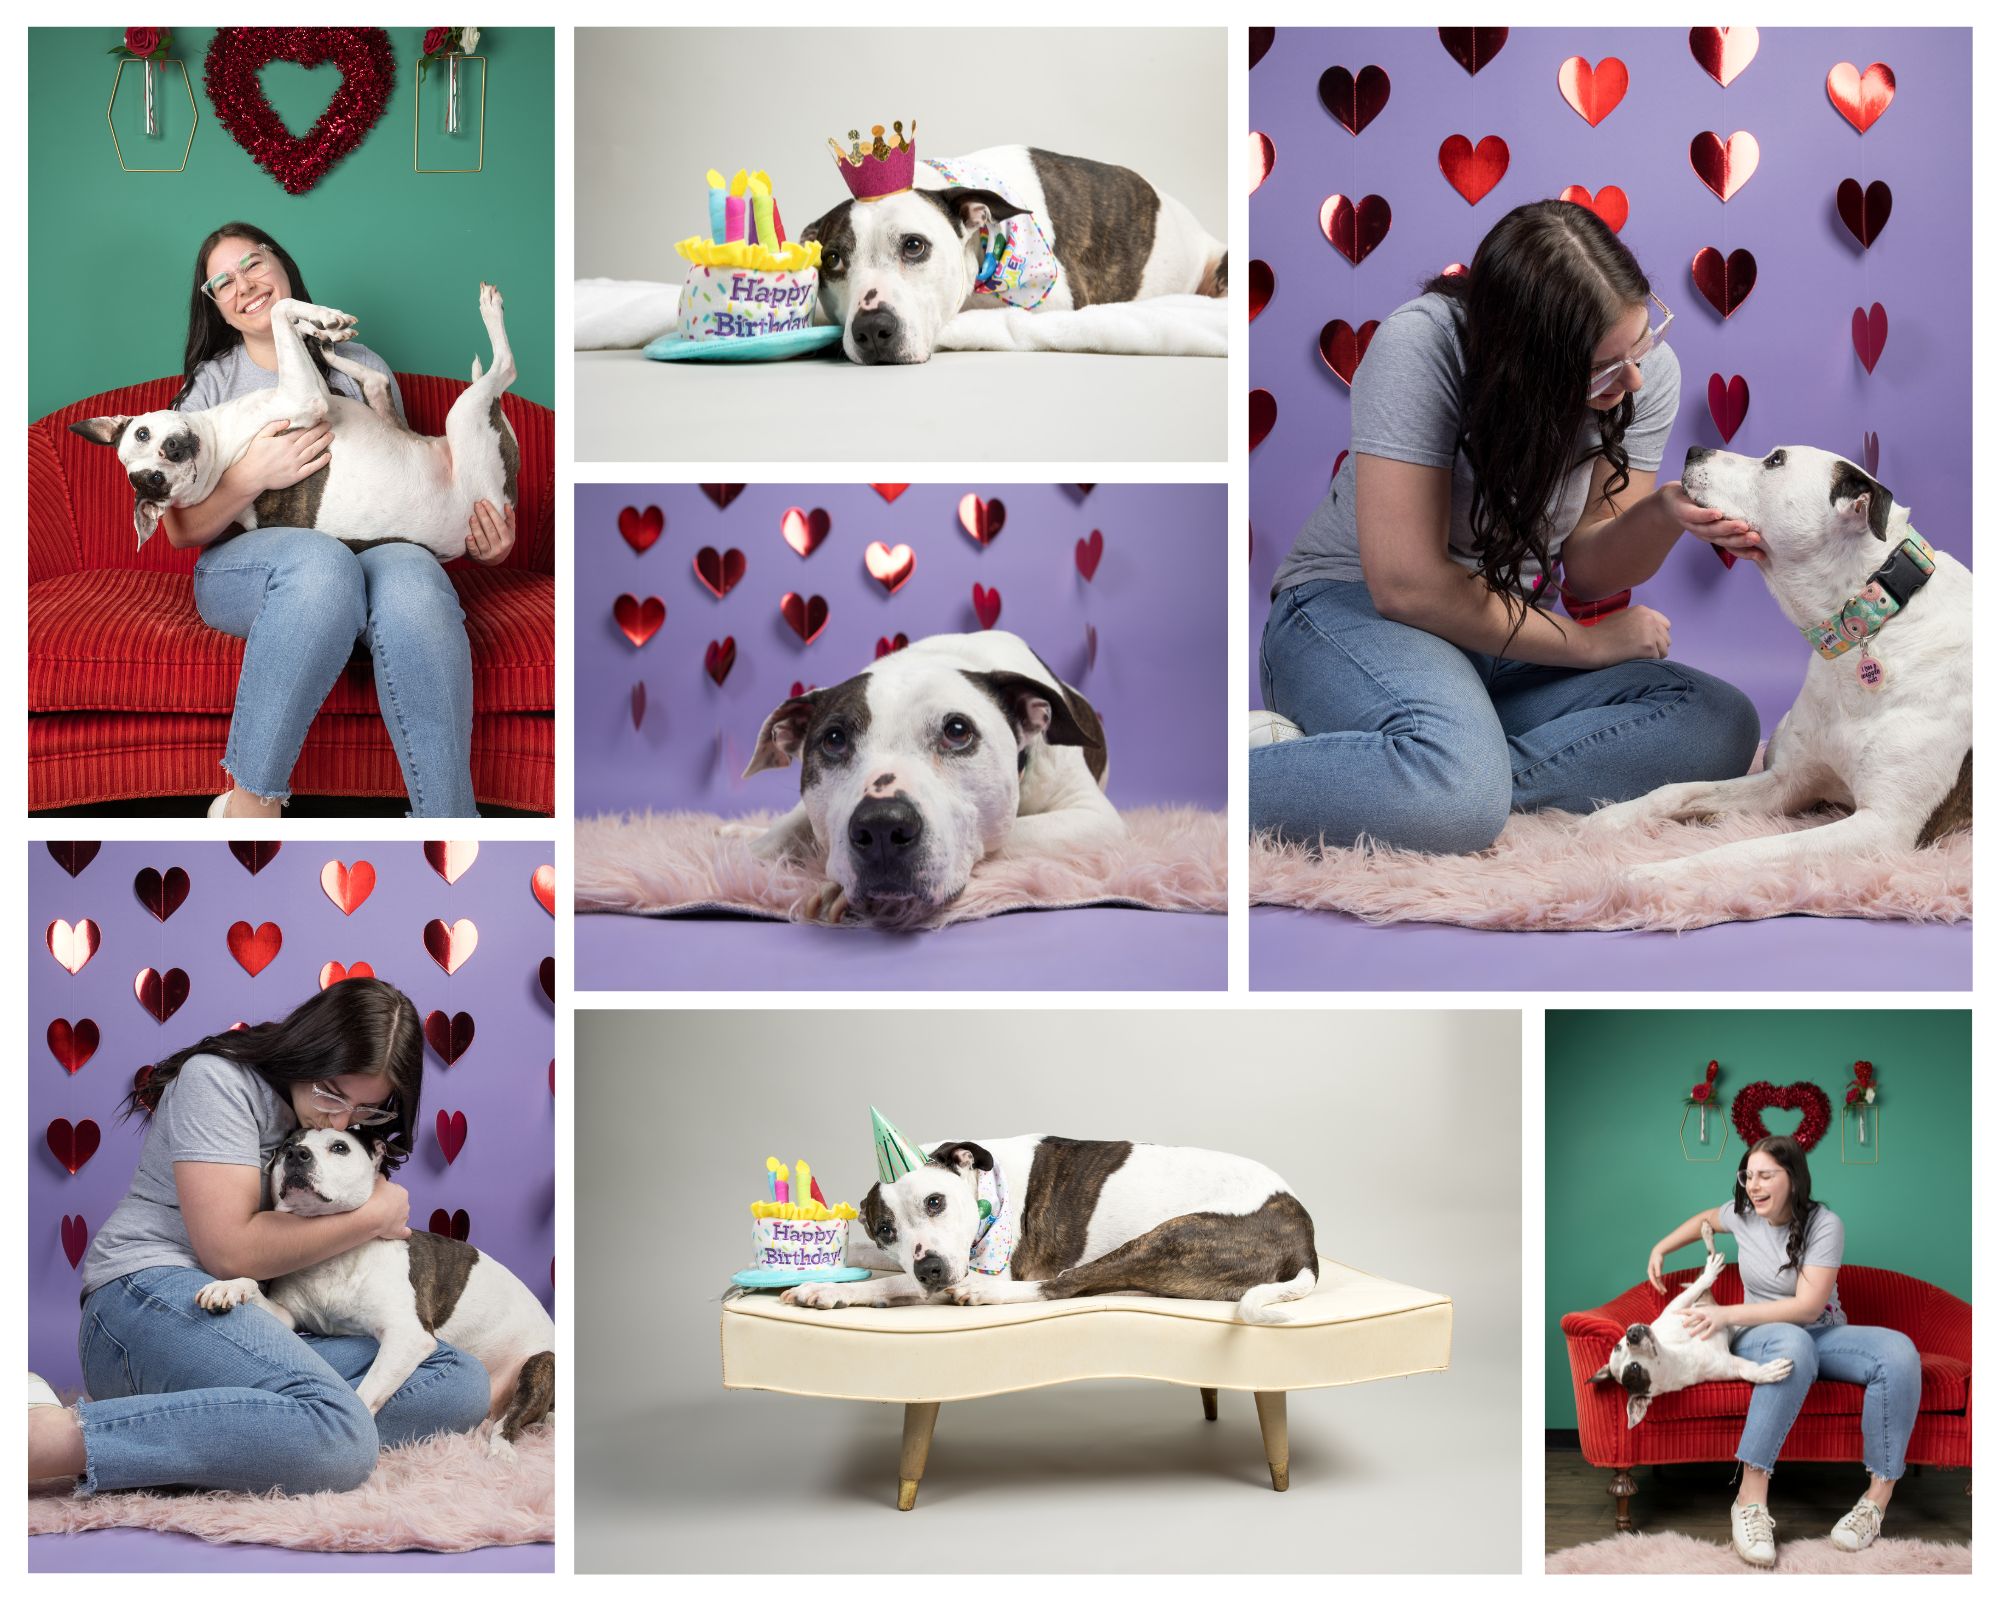 End of life pet photography -- 7 images showcasing an owner and her pitbull